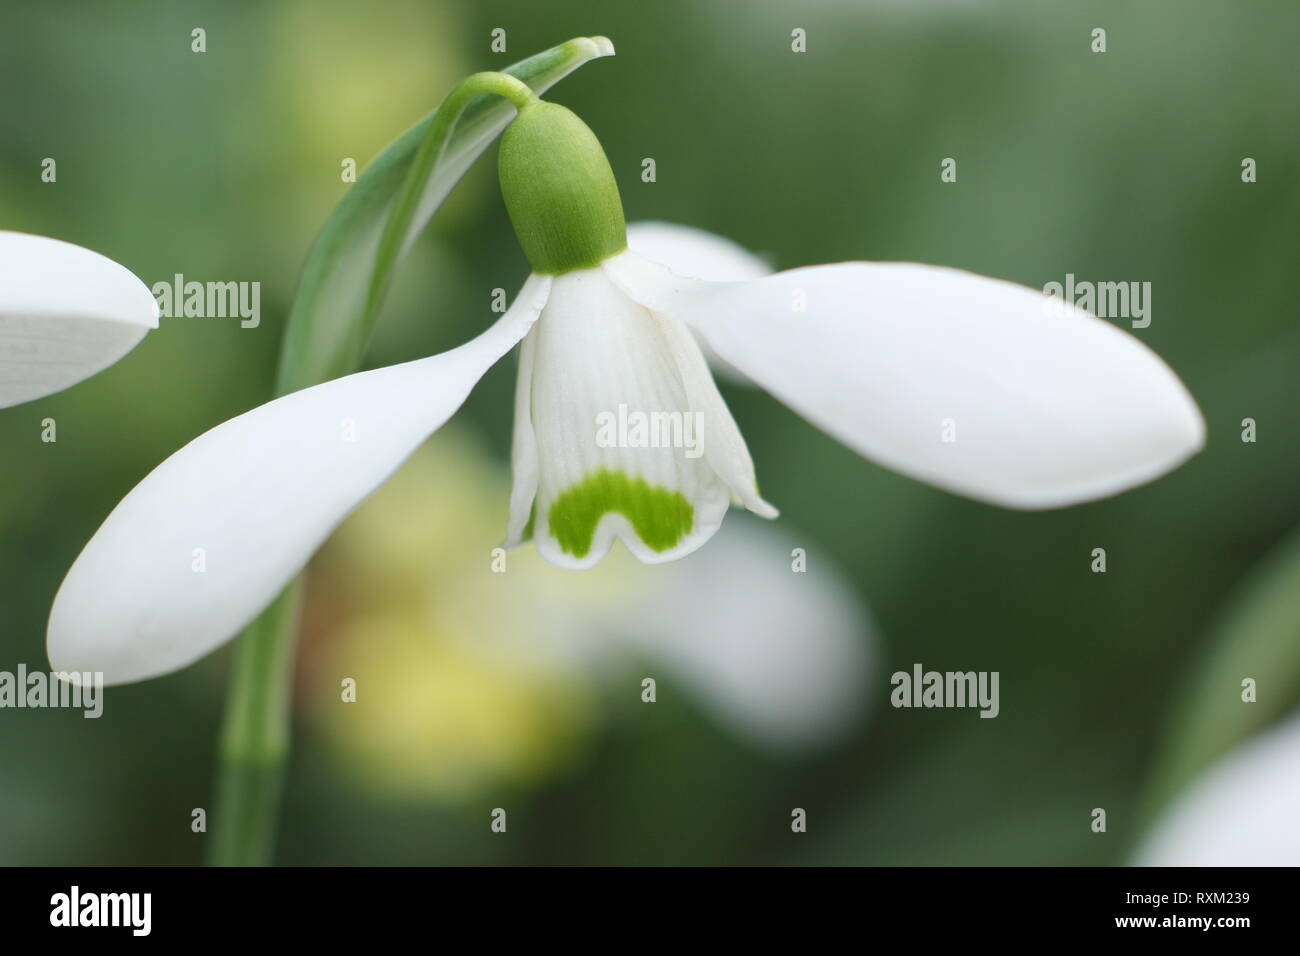 Galanthus 'Brenda Troyle' snowdrop flowering in an English country garden, - February, UK Stock Photo